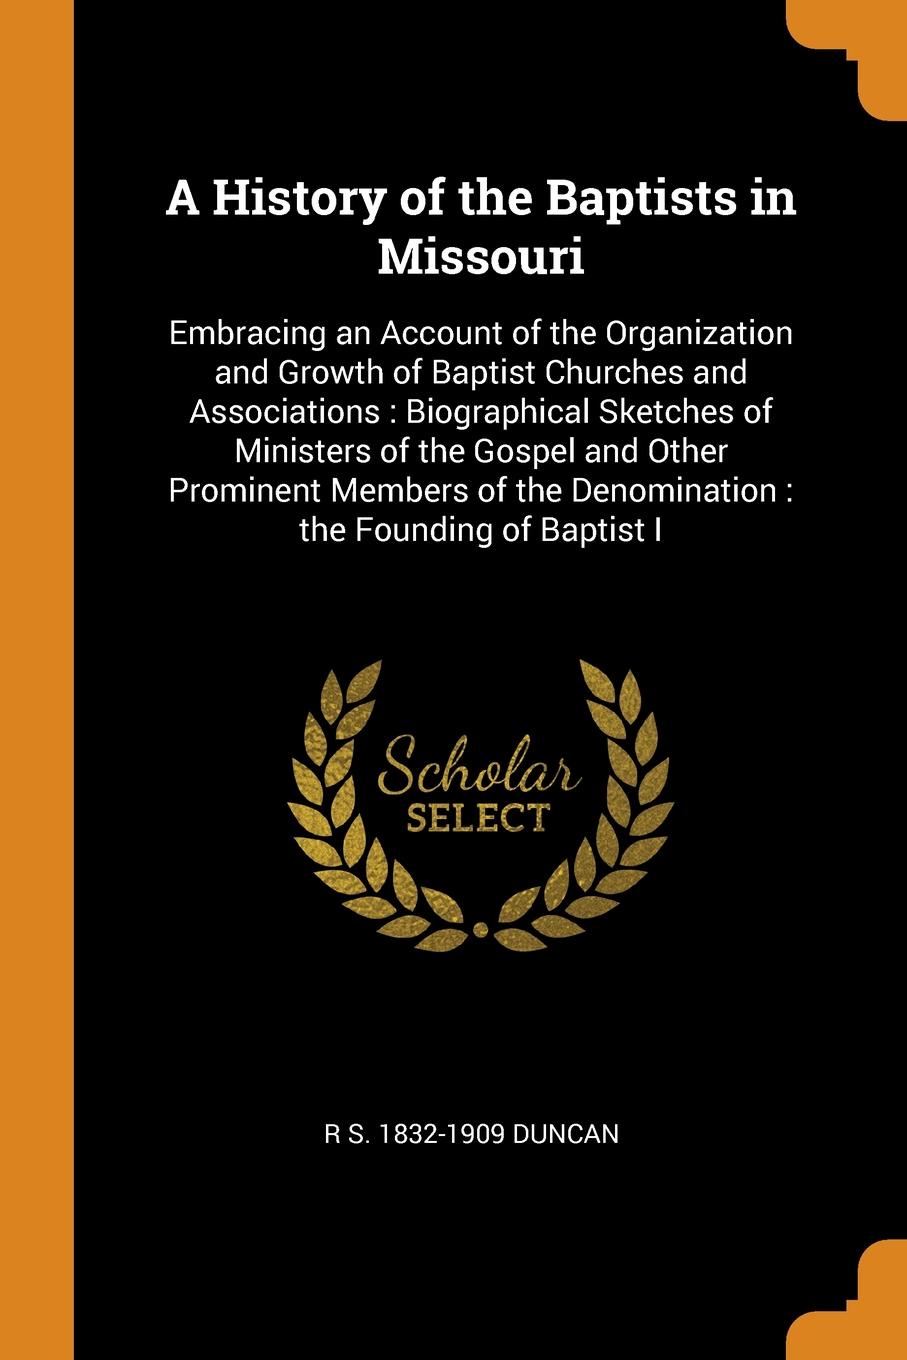 A History of the Baptists in Missouri. Embracing an Account of the Organization and Growth of Baptist Churches and Associations : Biographical Sketches of Ministers of the Gospel and Other Prominent Members of the Denomination : the Founding of Ba...